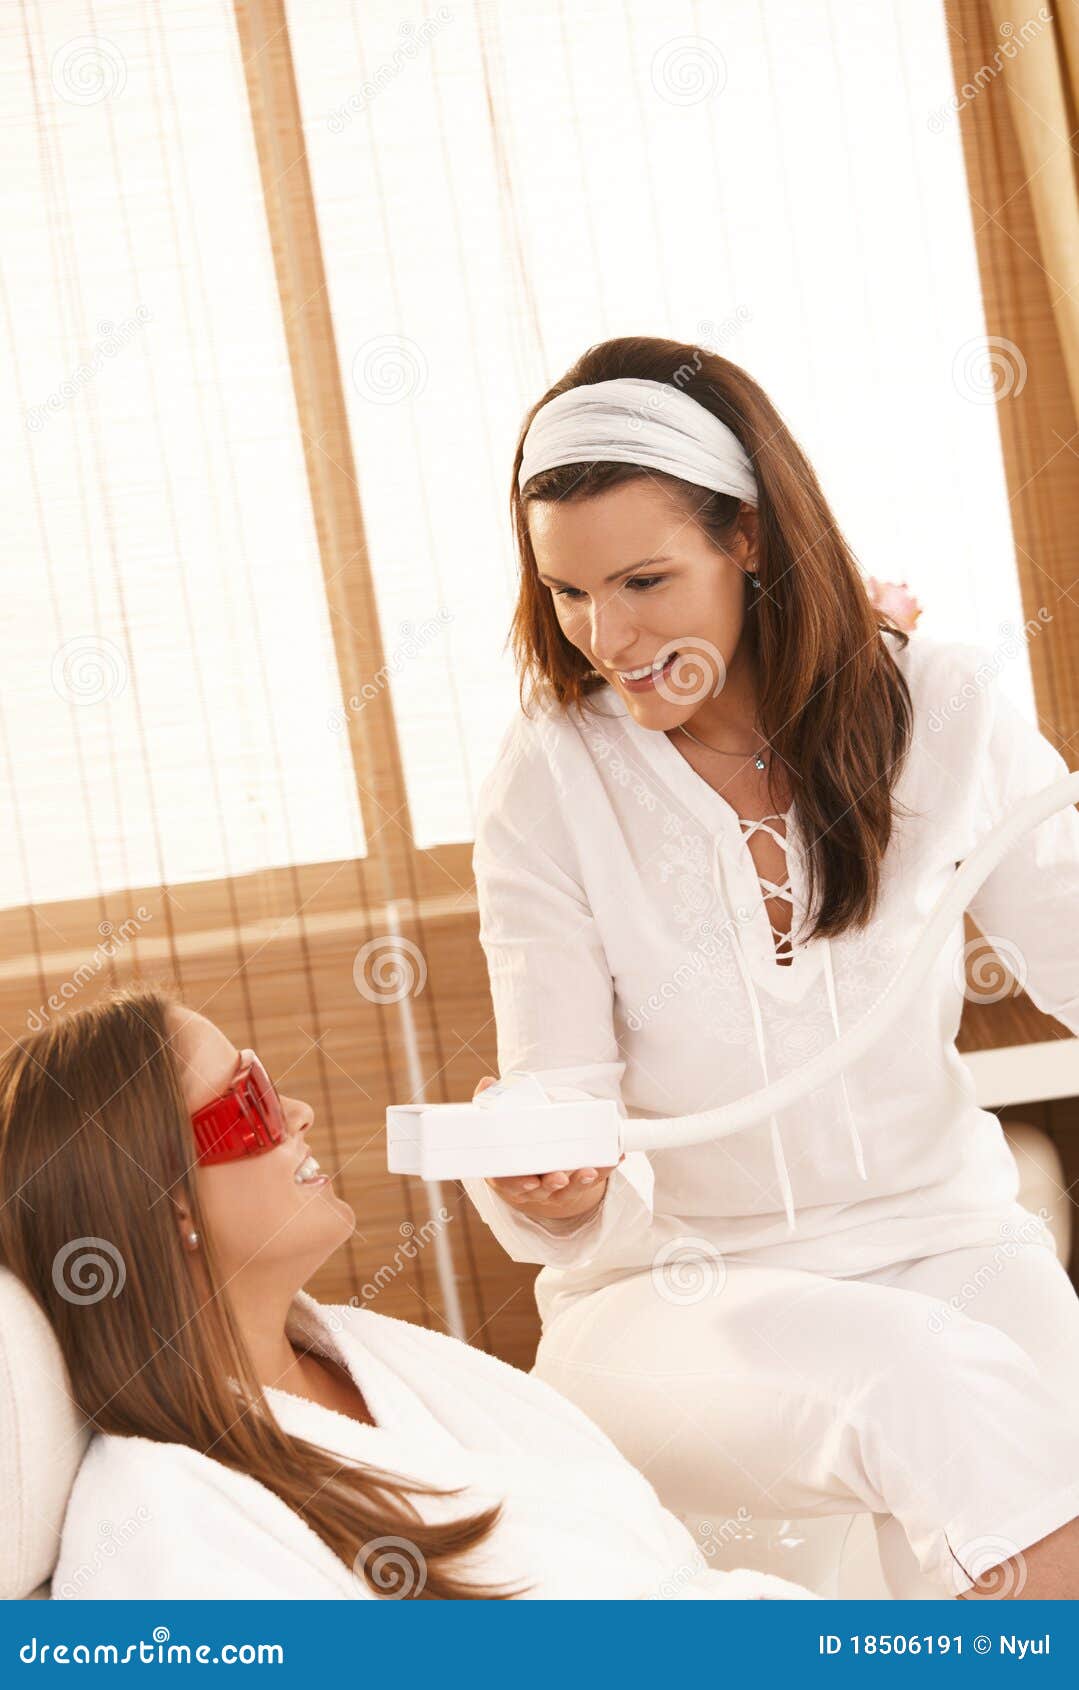 beautician doing tooth whitening